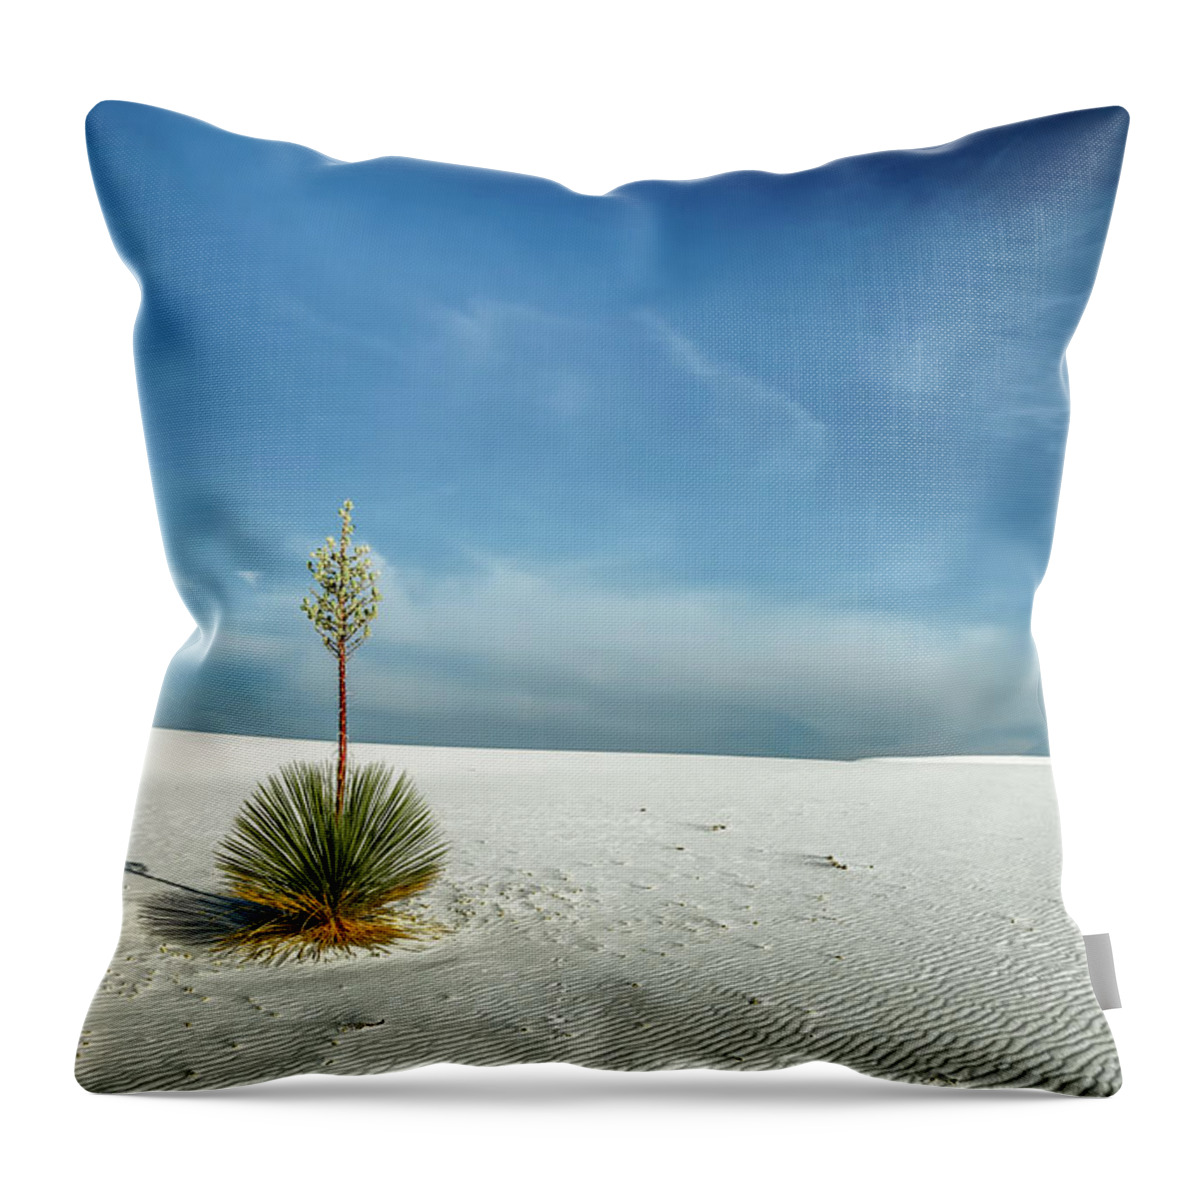 White Sands National Monument Throw Pillow featuring the photograph The Sentinel by James Barber